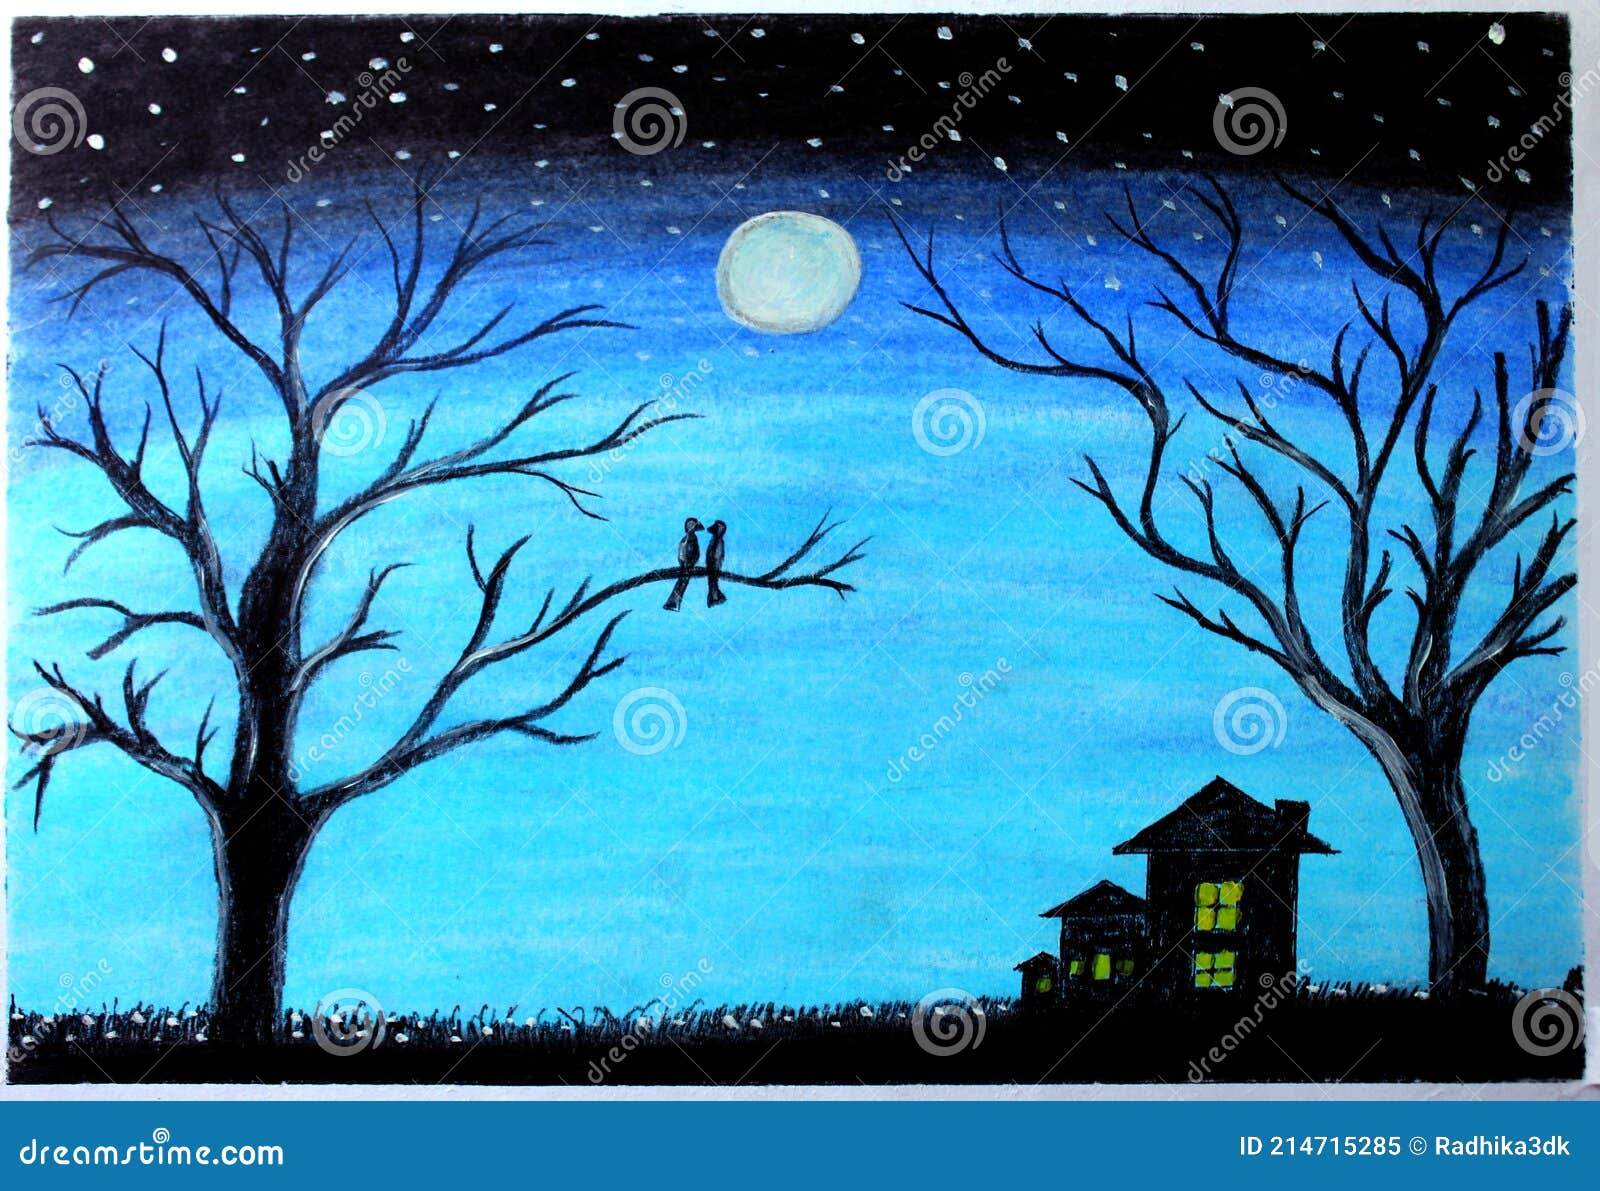 27 Best Easy Scenery Drawing ideas | easy scenery drawing, oil pastel  colours, scenery